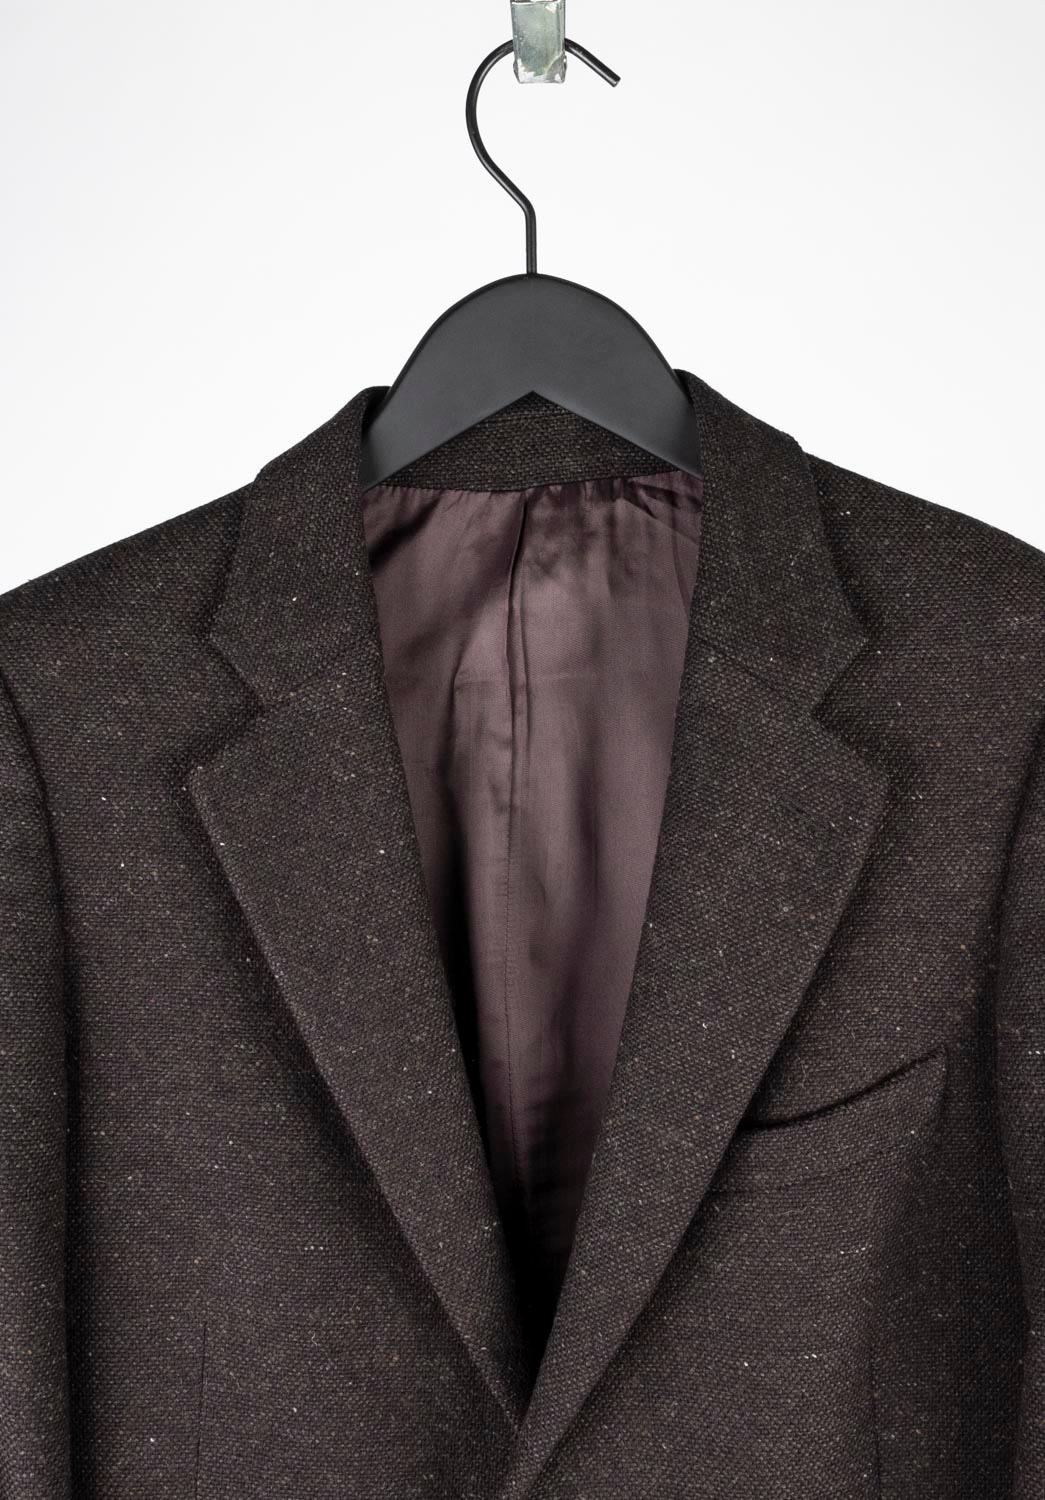 100% genuine Miu Miu by Prada Blazer, S681 
Color: brown
(An actual color may a bit vary due to individual computer screen interpretation)
Material: 100% wool
Tag size: ITA48 (Medium)
This jacket is great quality item. Rate 9 of 10, excellent used